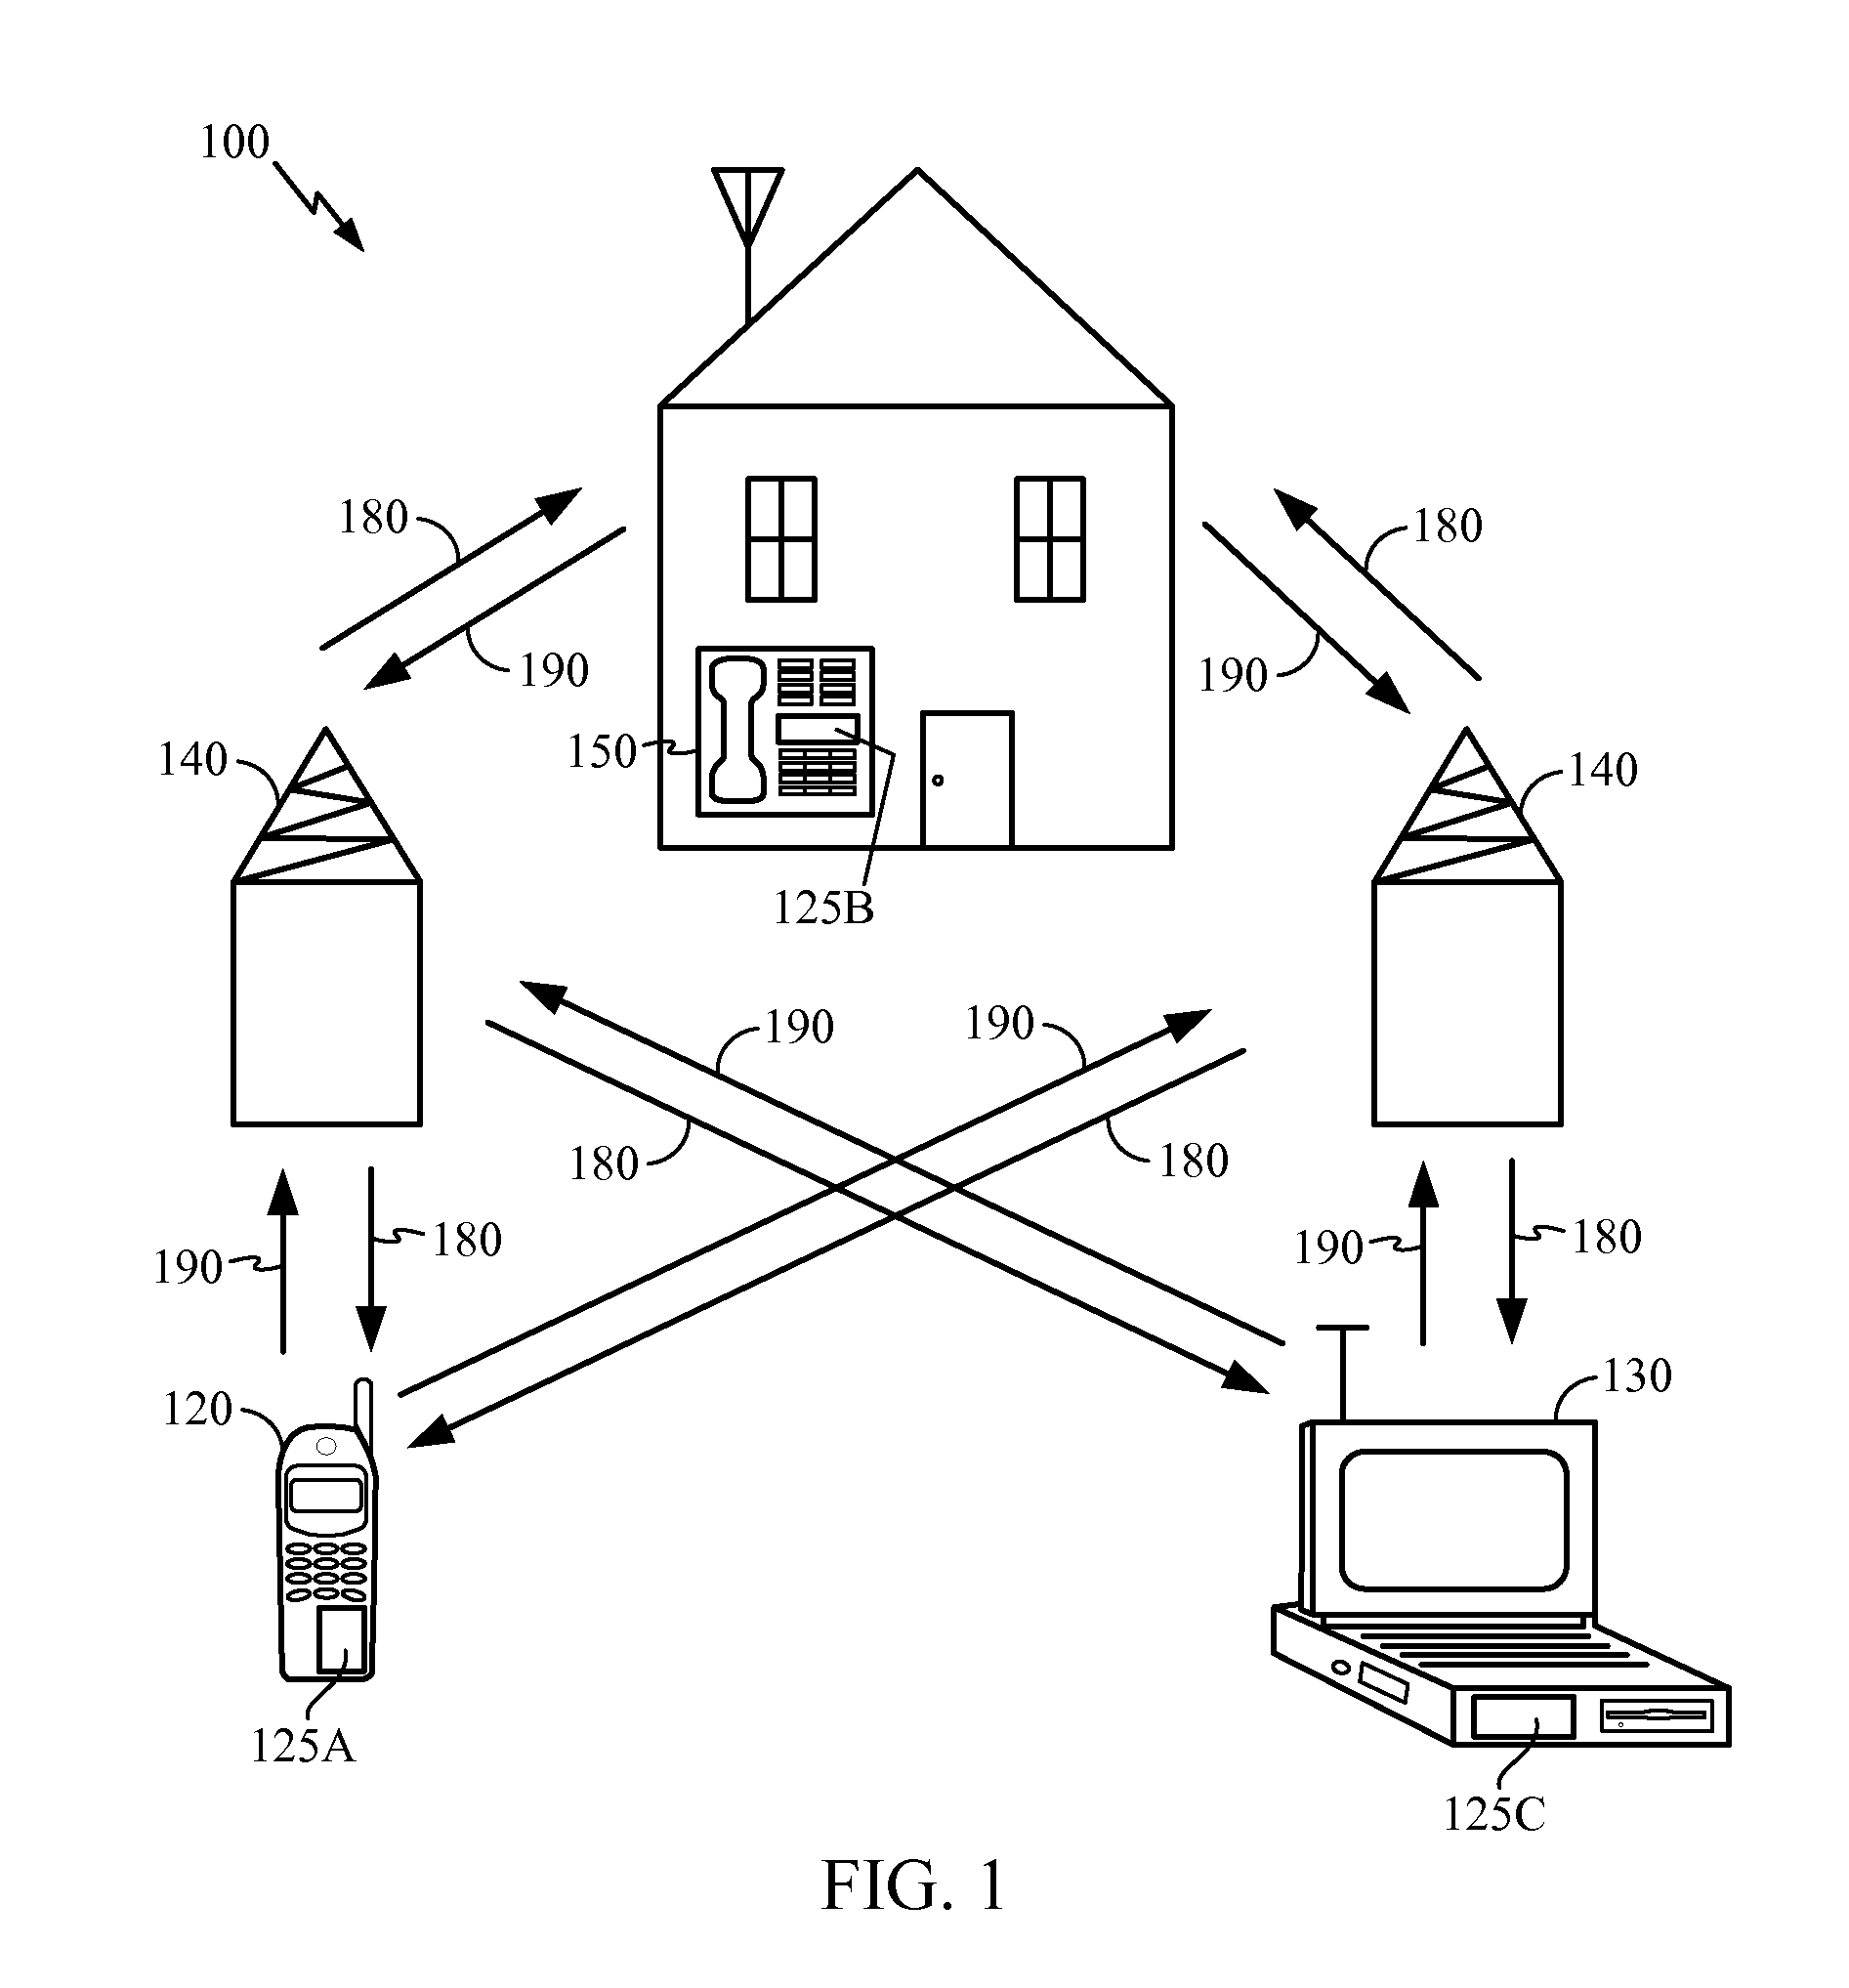 Method of Associating Groups of Classified Source Addresses with Vibration Patterns